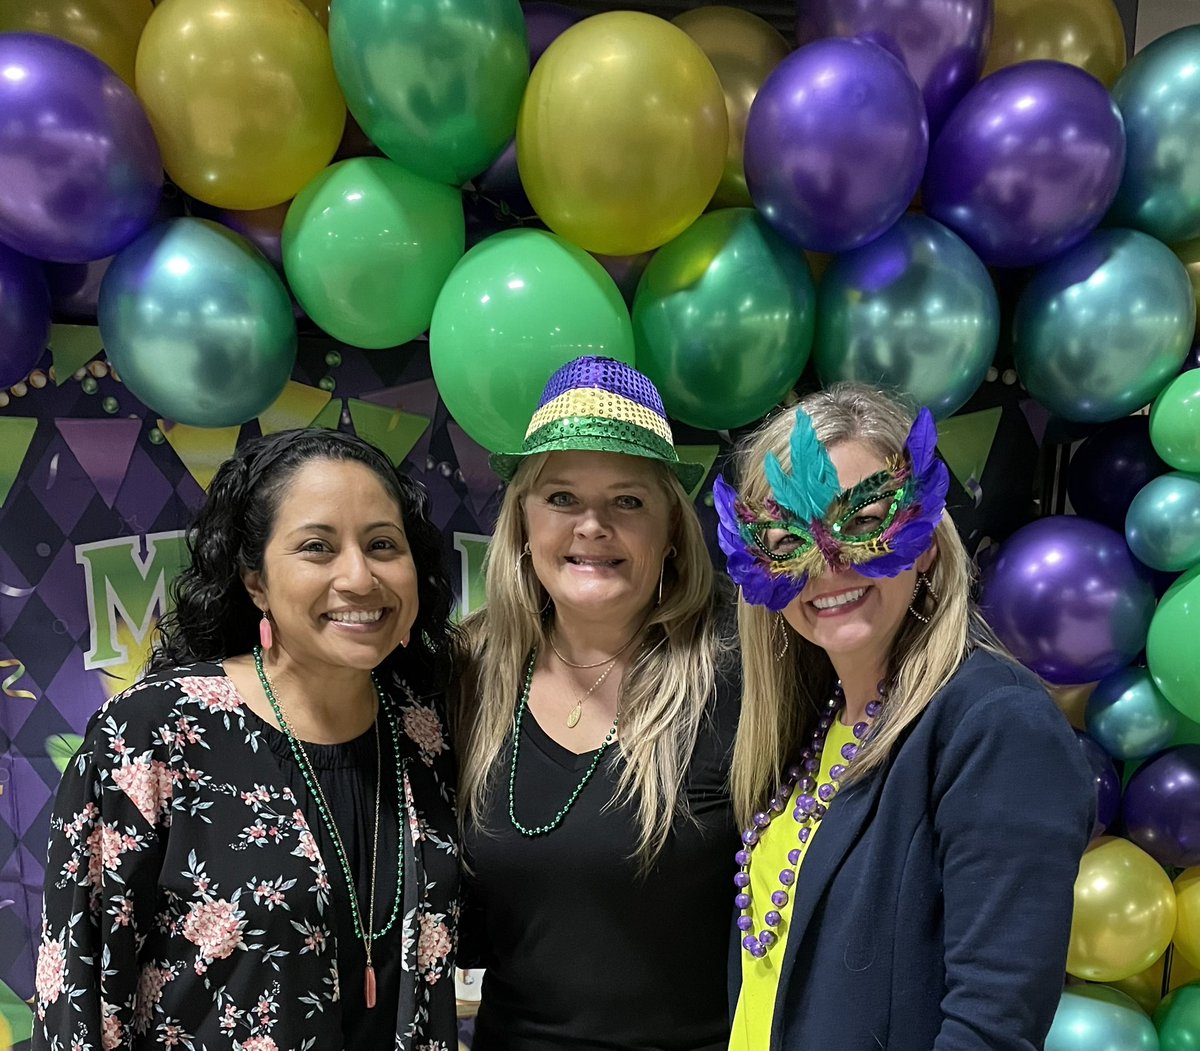 What a fun evening at the Seguin Education Foundation Mardi Gras Party! @alvargasCCMR @MLissHaas